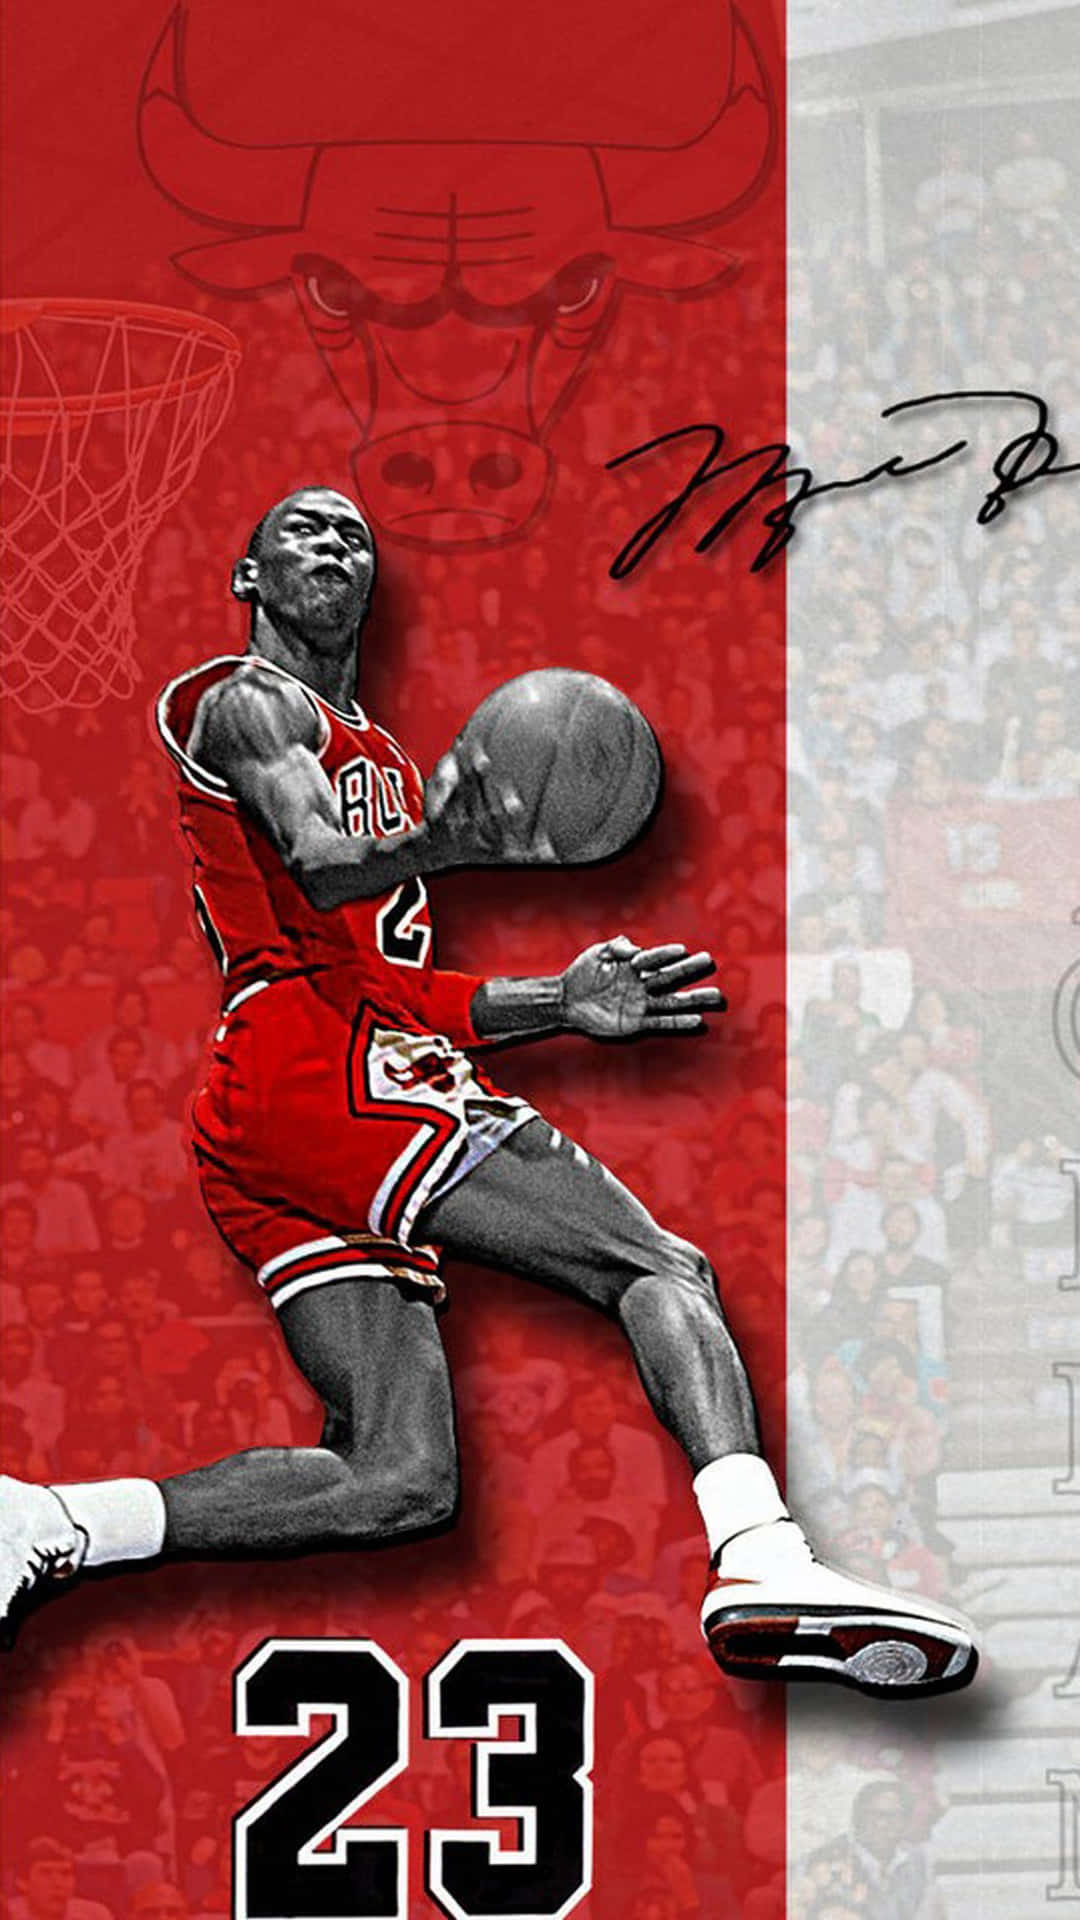 Fly High in Style with Dope Jordan Wallpaper